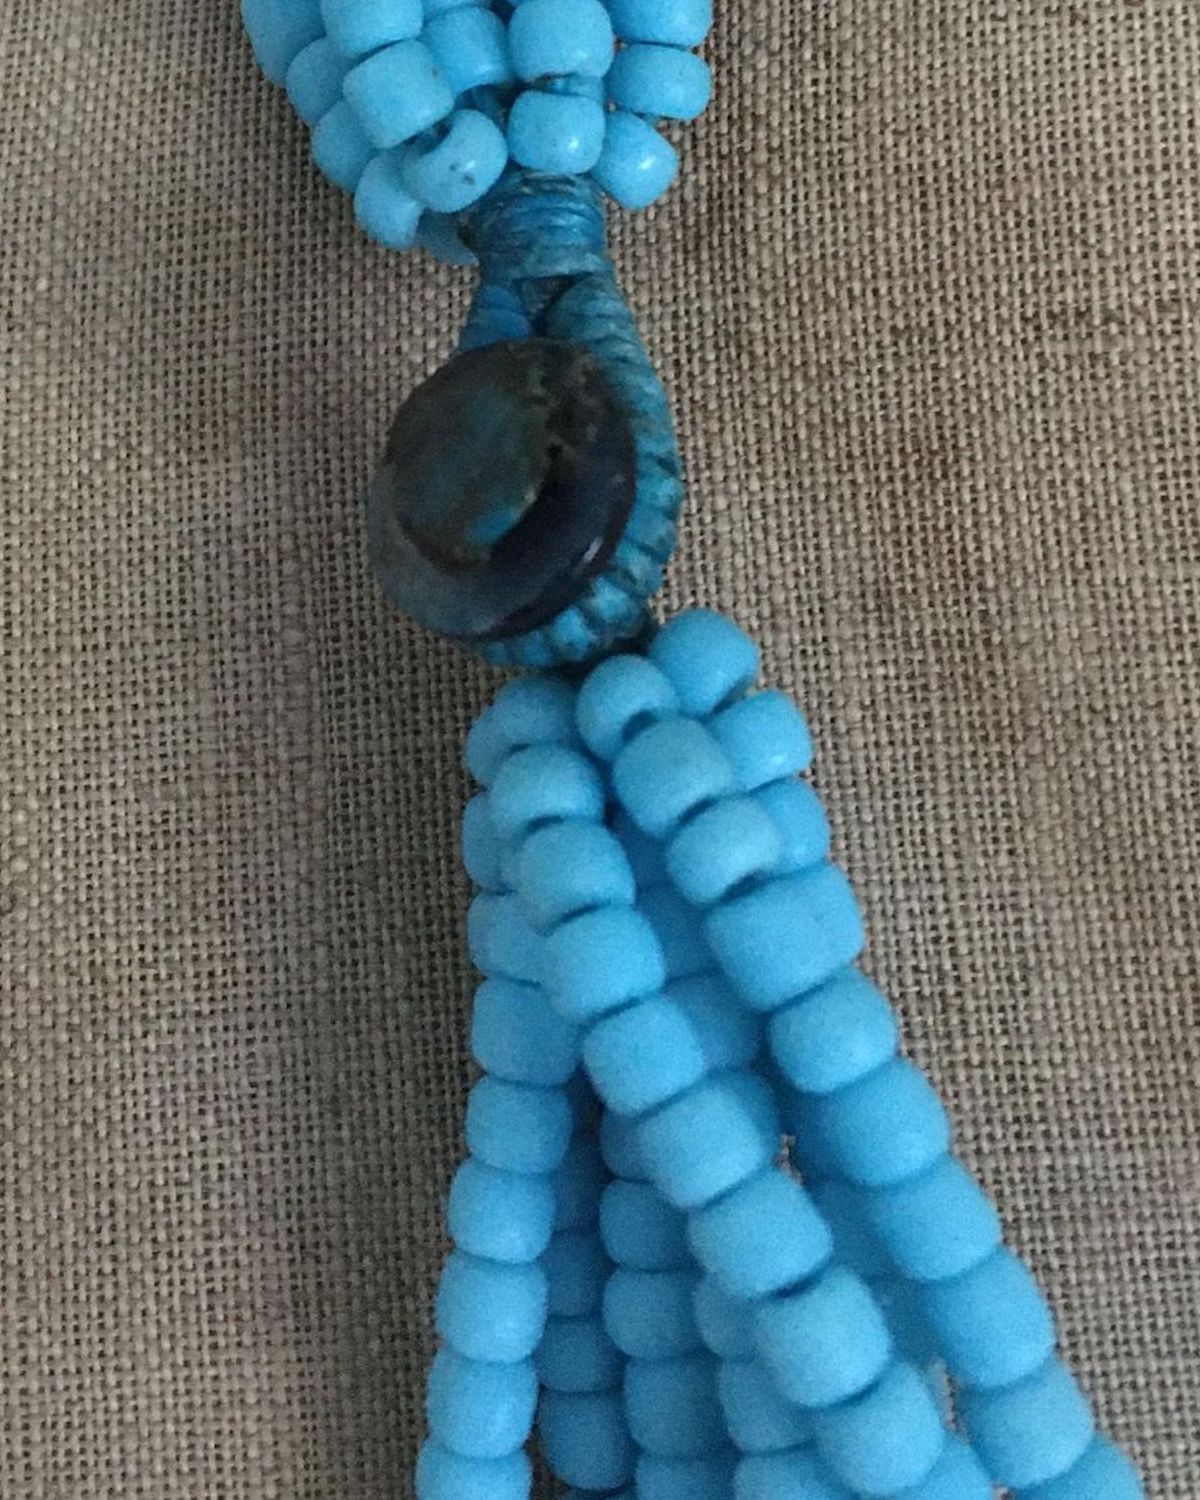 Light Blue Opaque Glass Bead Necklace with Bronze Accent